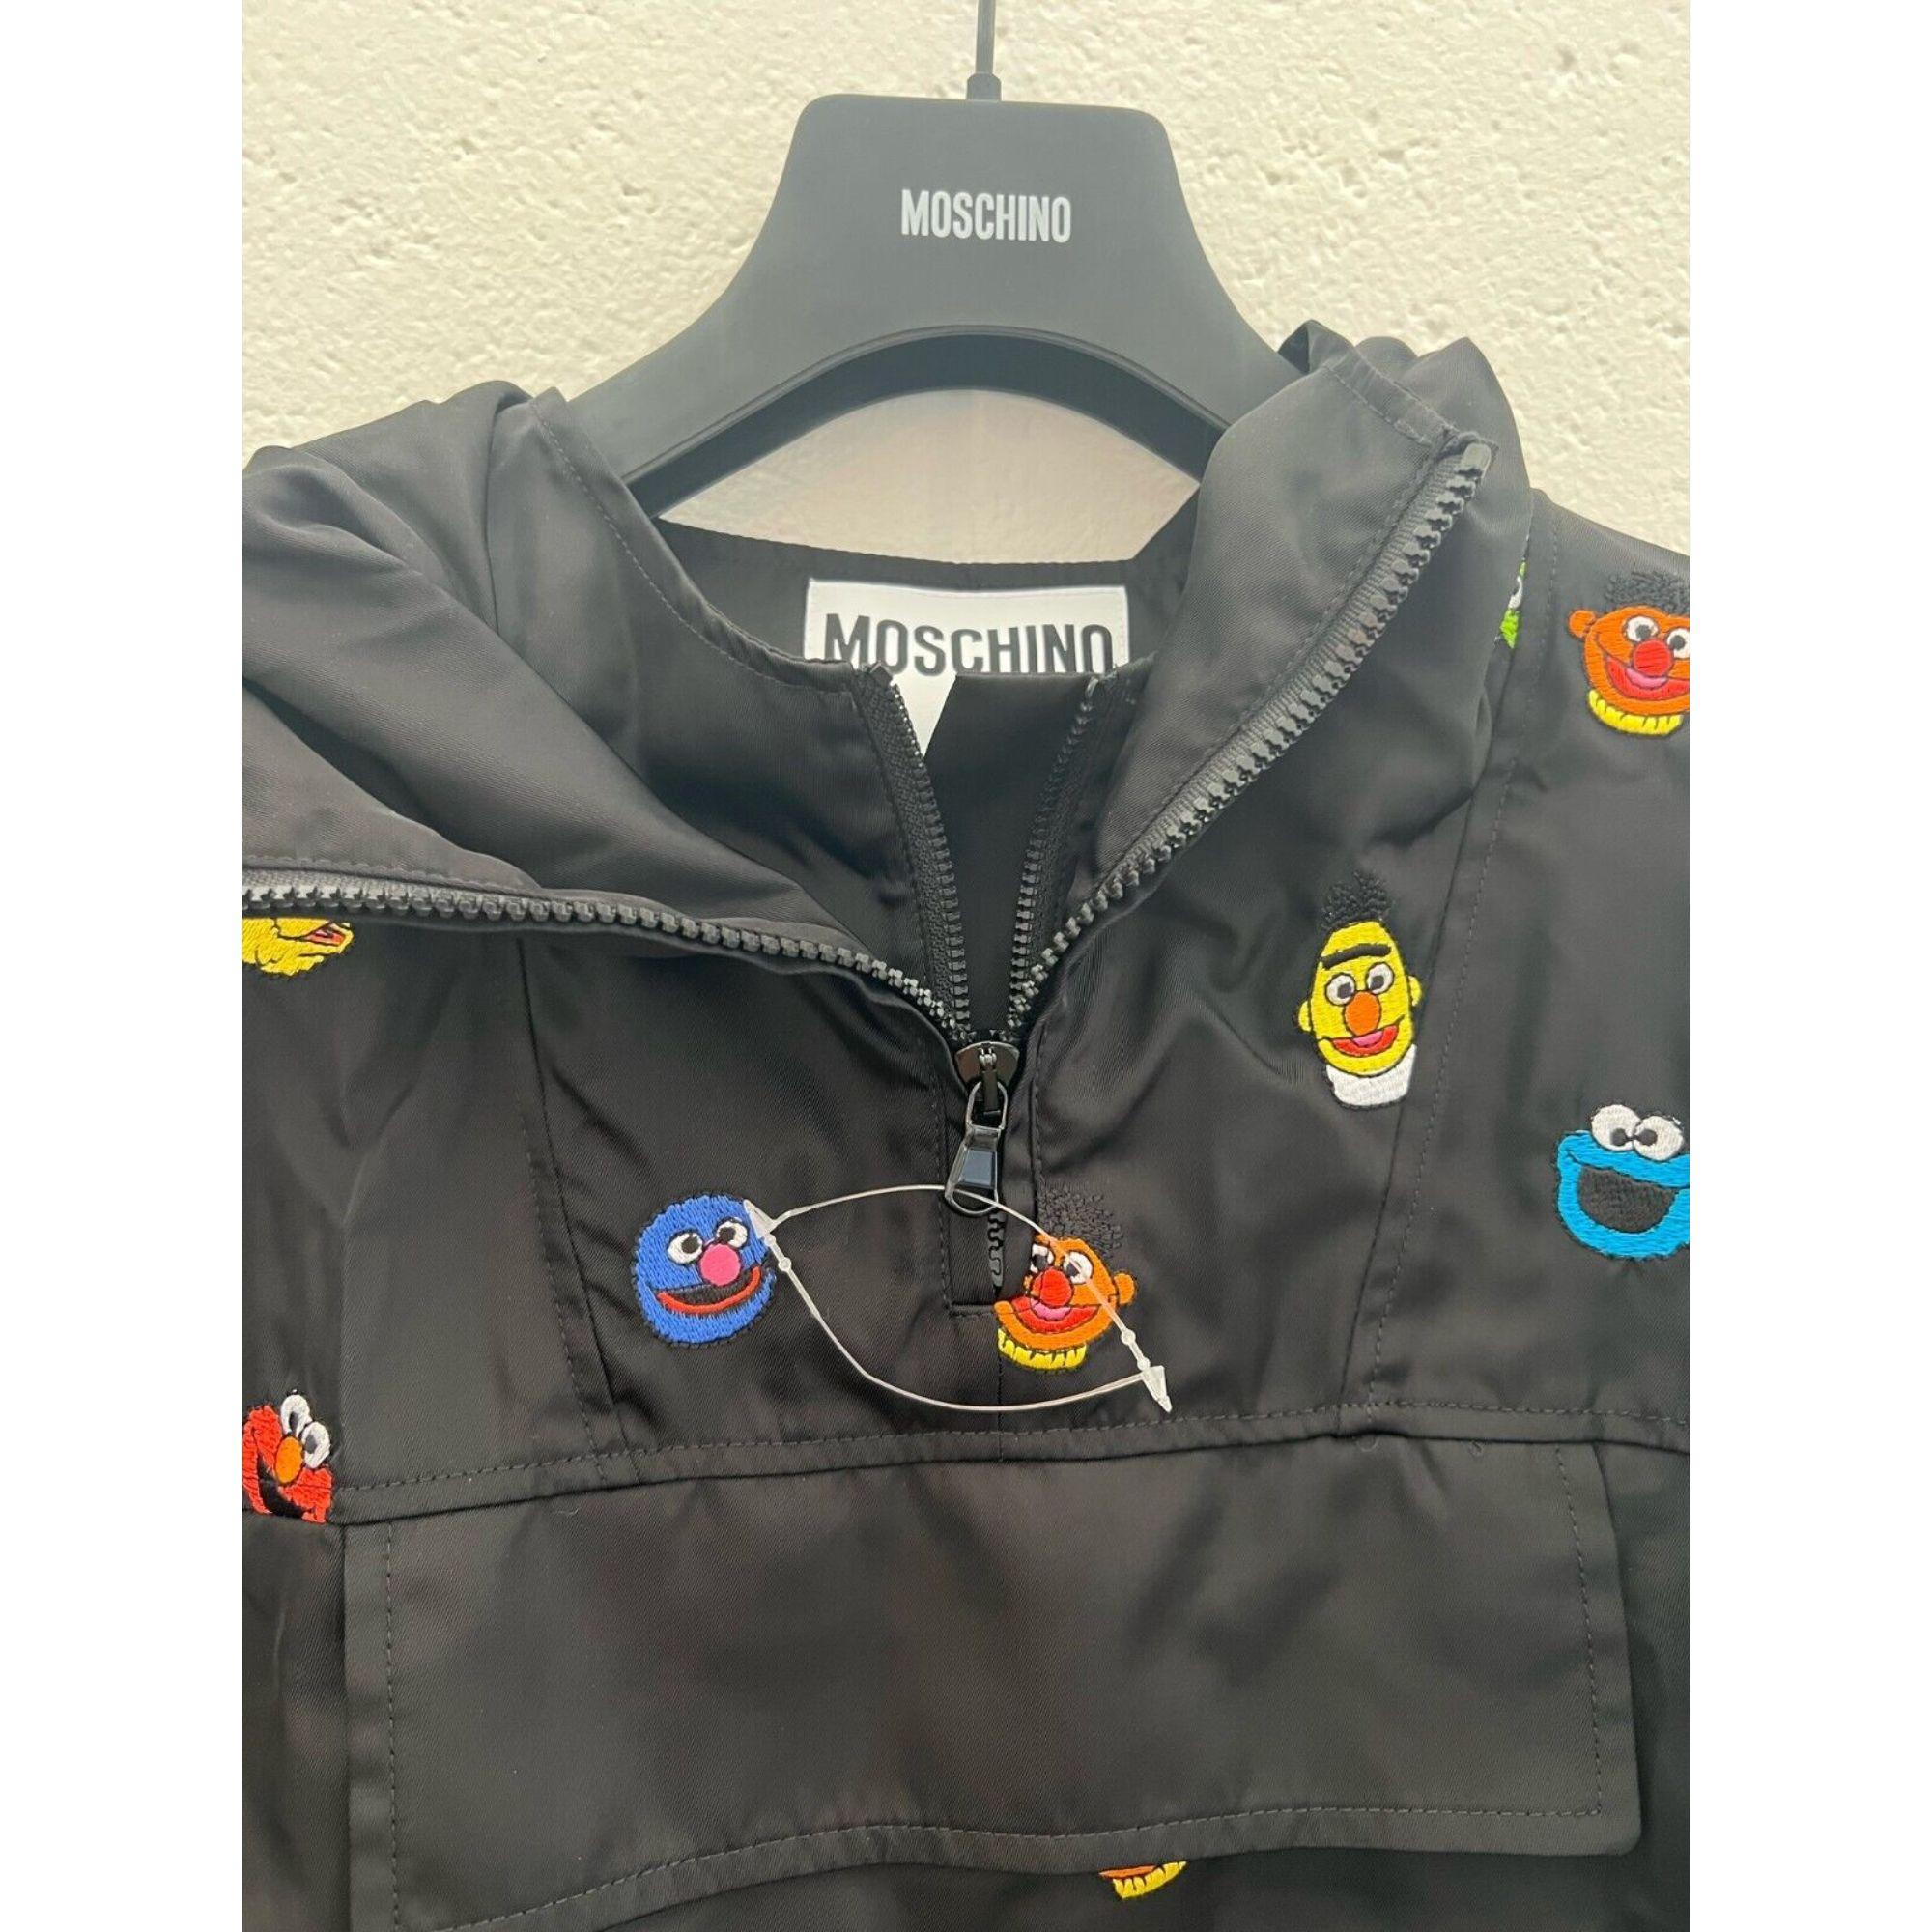 AW21 Moschino Couture Sesame Street Embroidered Hooded Jacket by Jeremy Scott In New Condition For Sale In Palm Springs, CA